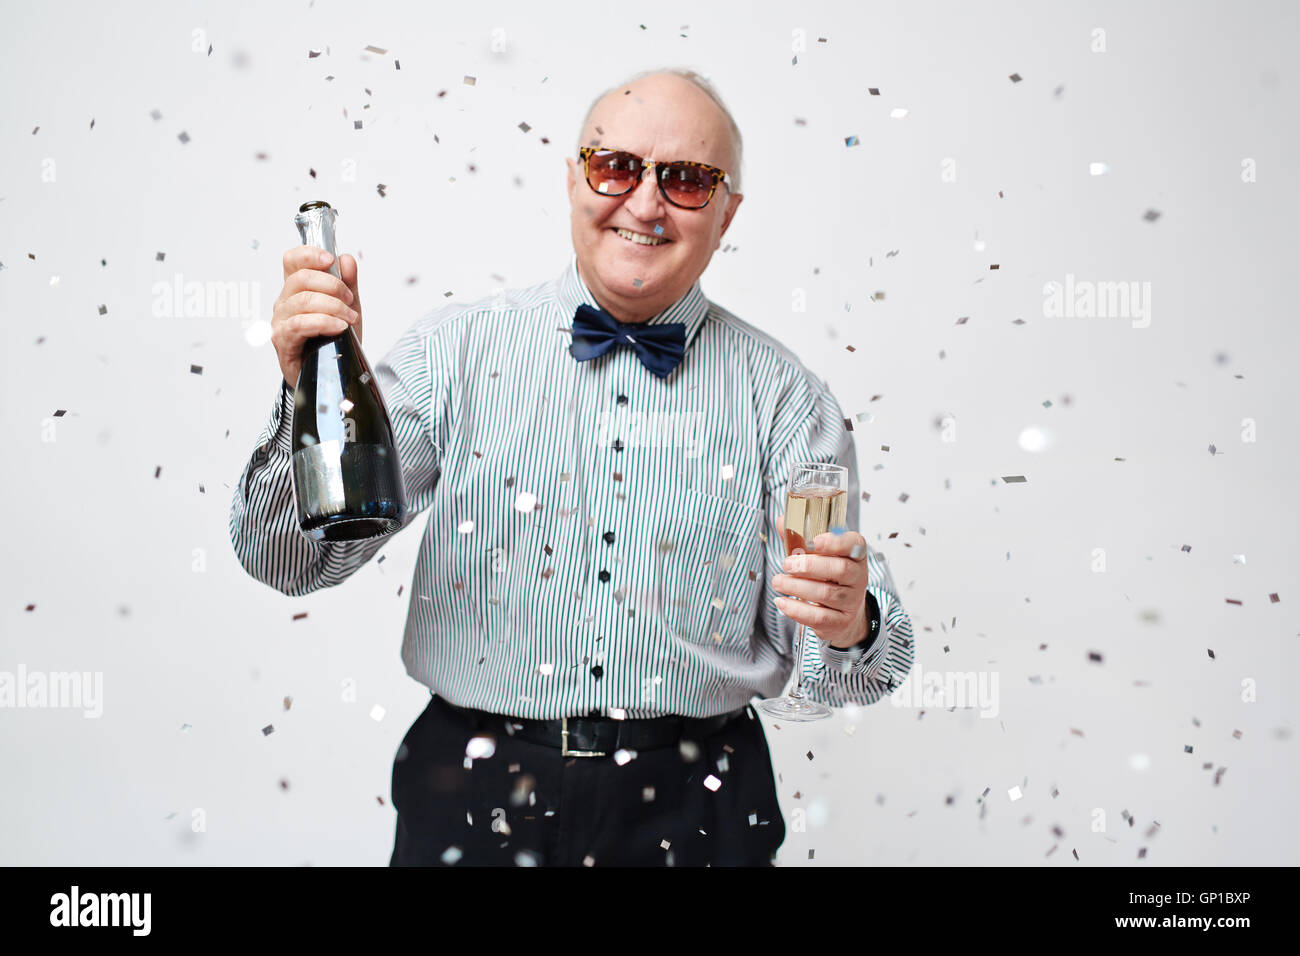 Waist up portrait of smiling well-dressed senior man in sunglasses holding bottle of sparkling wine and full wineglass with conf Stock Photo